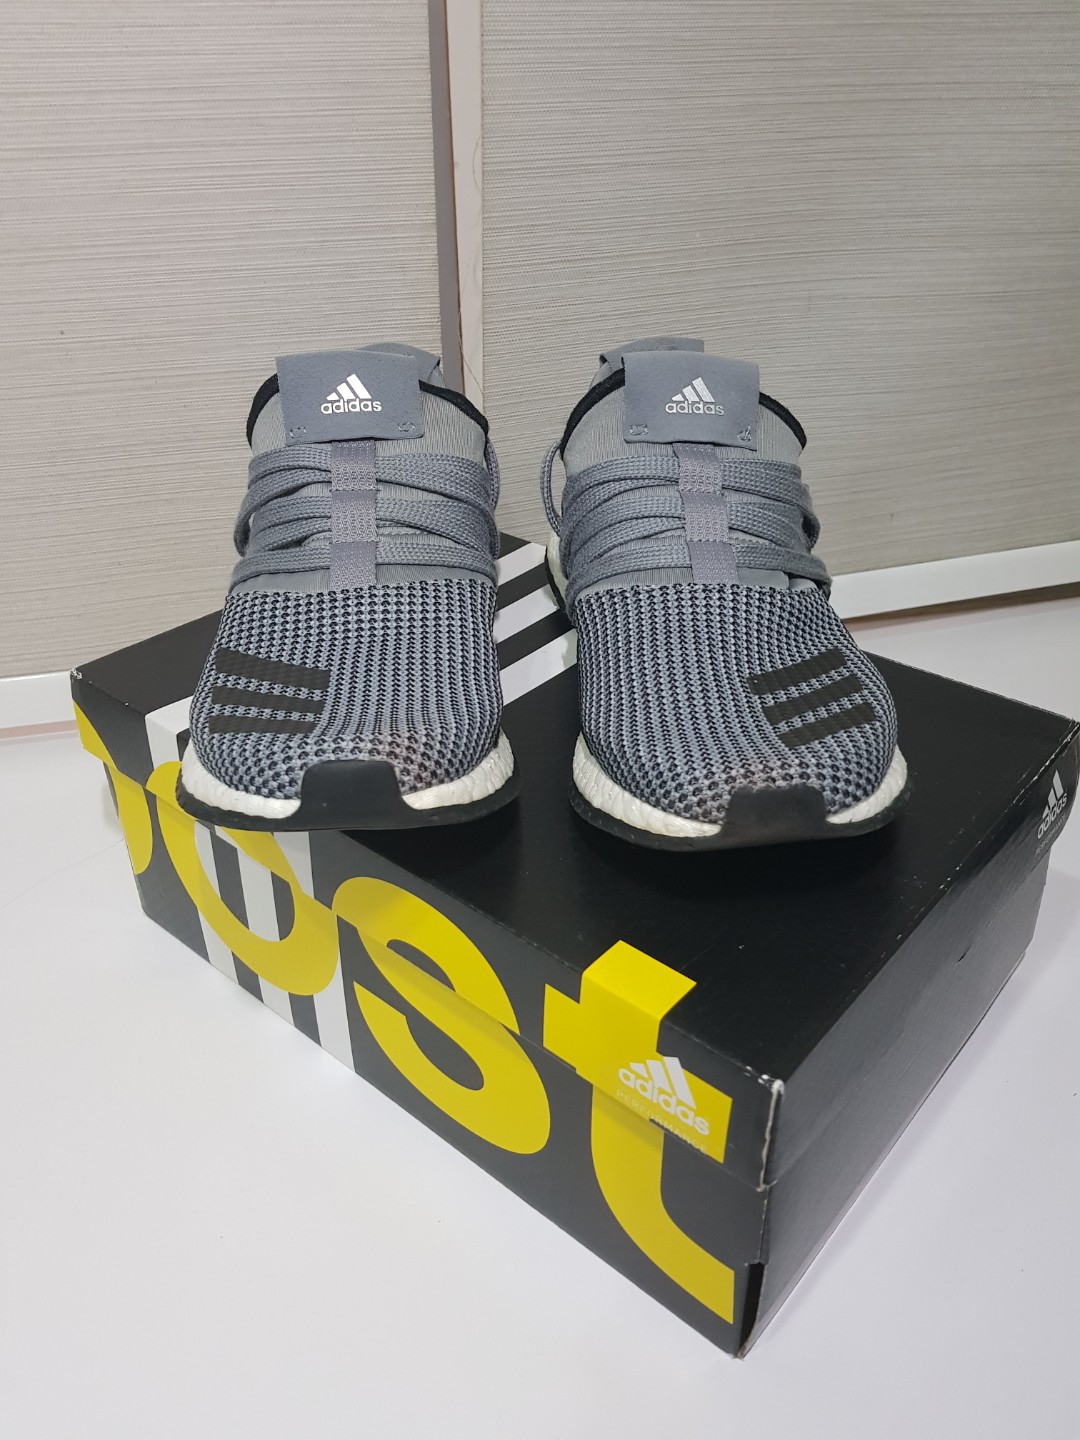 adidas pure boost r review